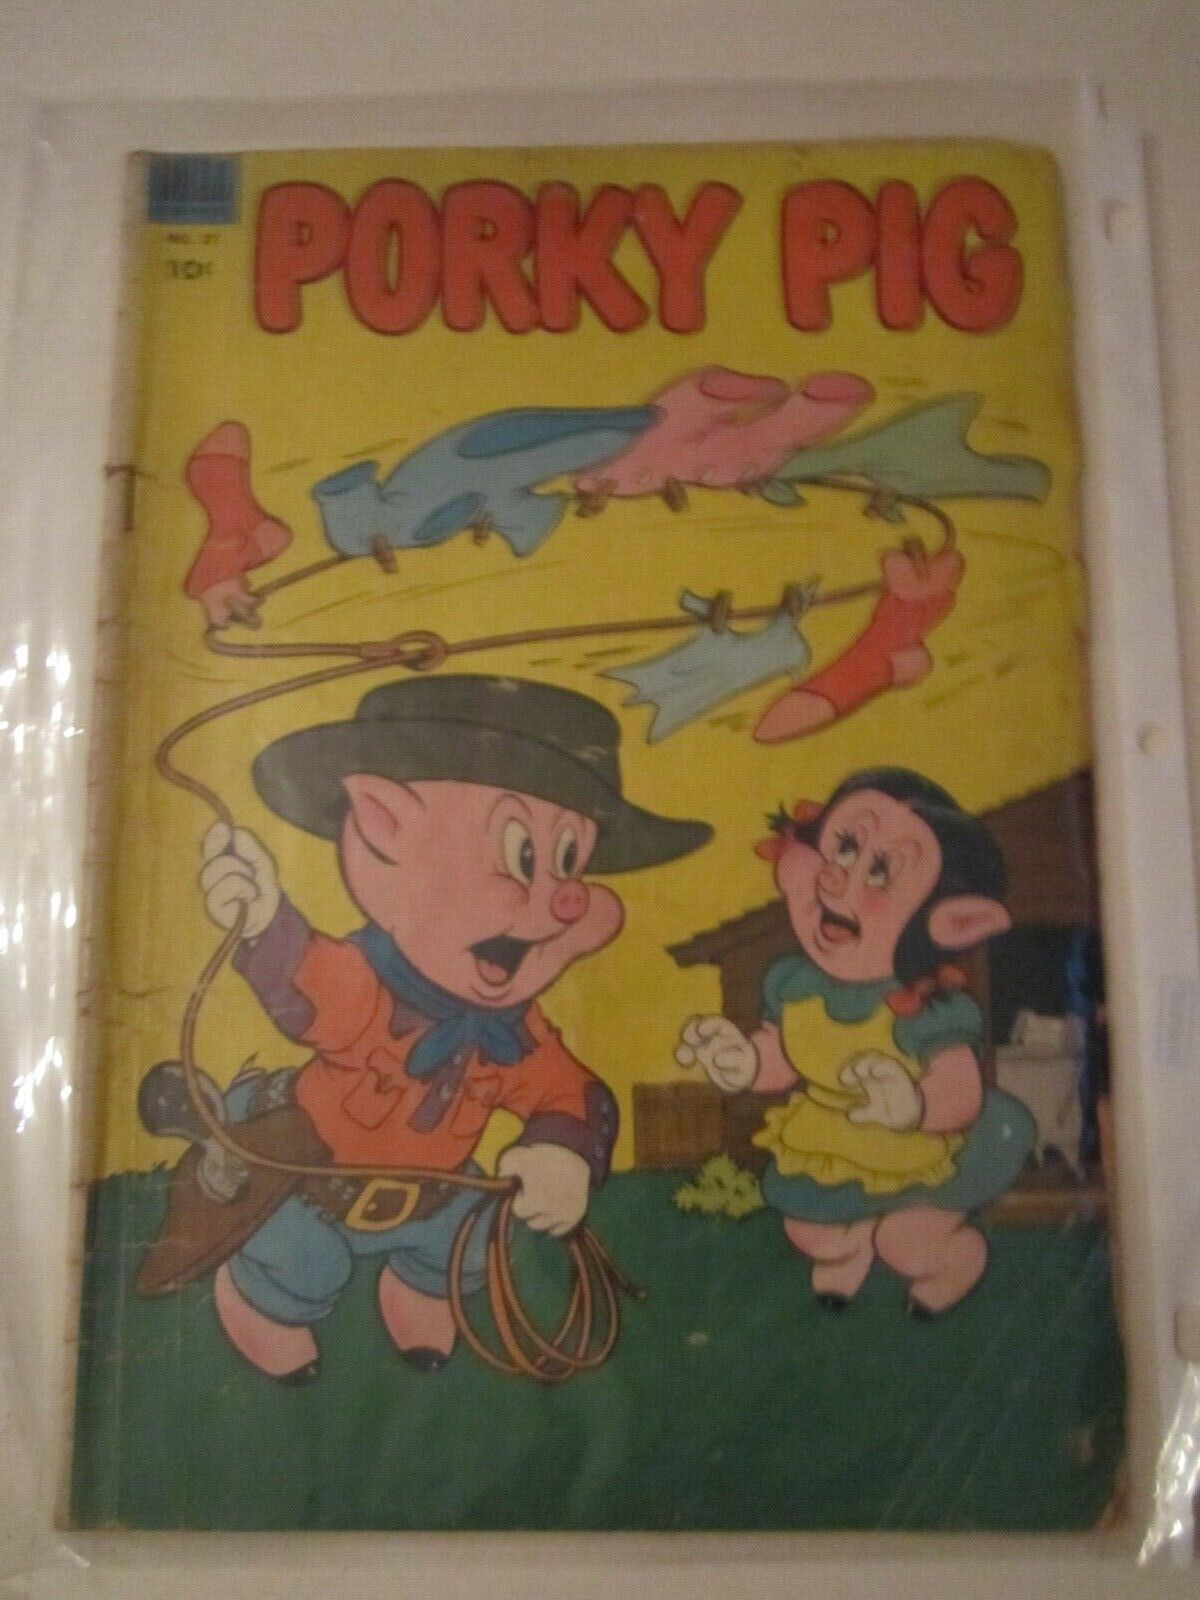 LOT OF 10 VINTAGE DELL COMICS BOOKS - PORKY PIG AND MORE - LOT G